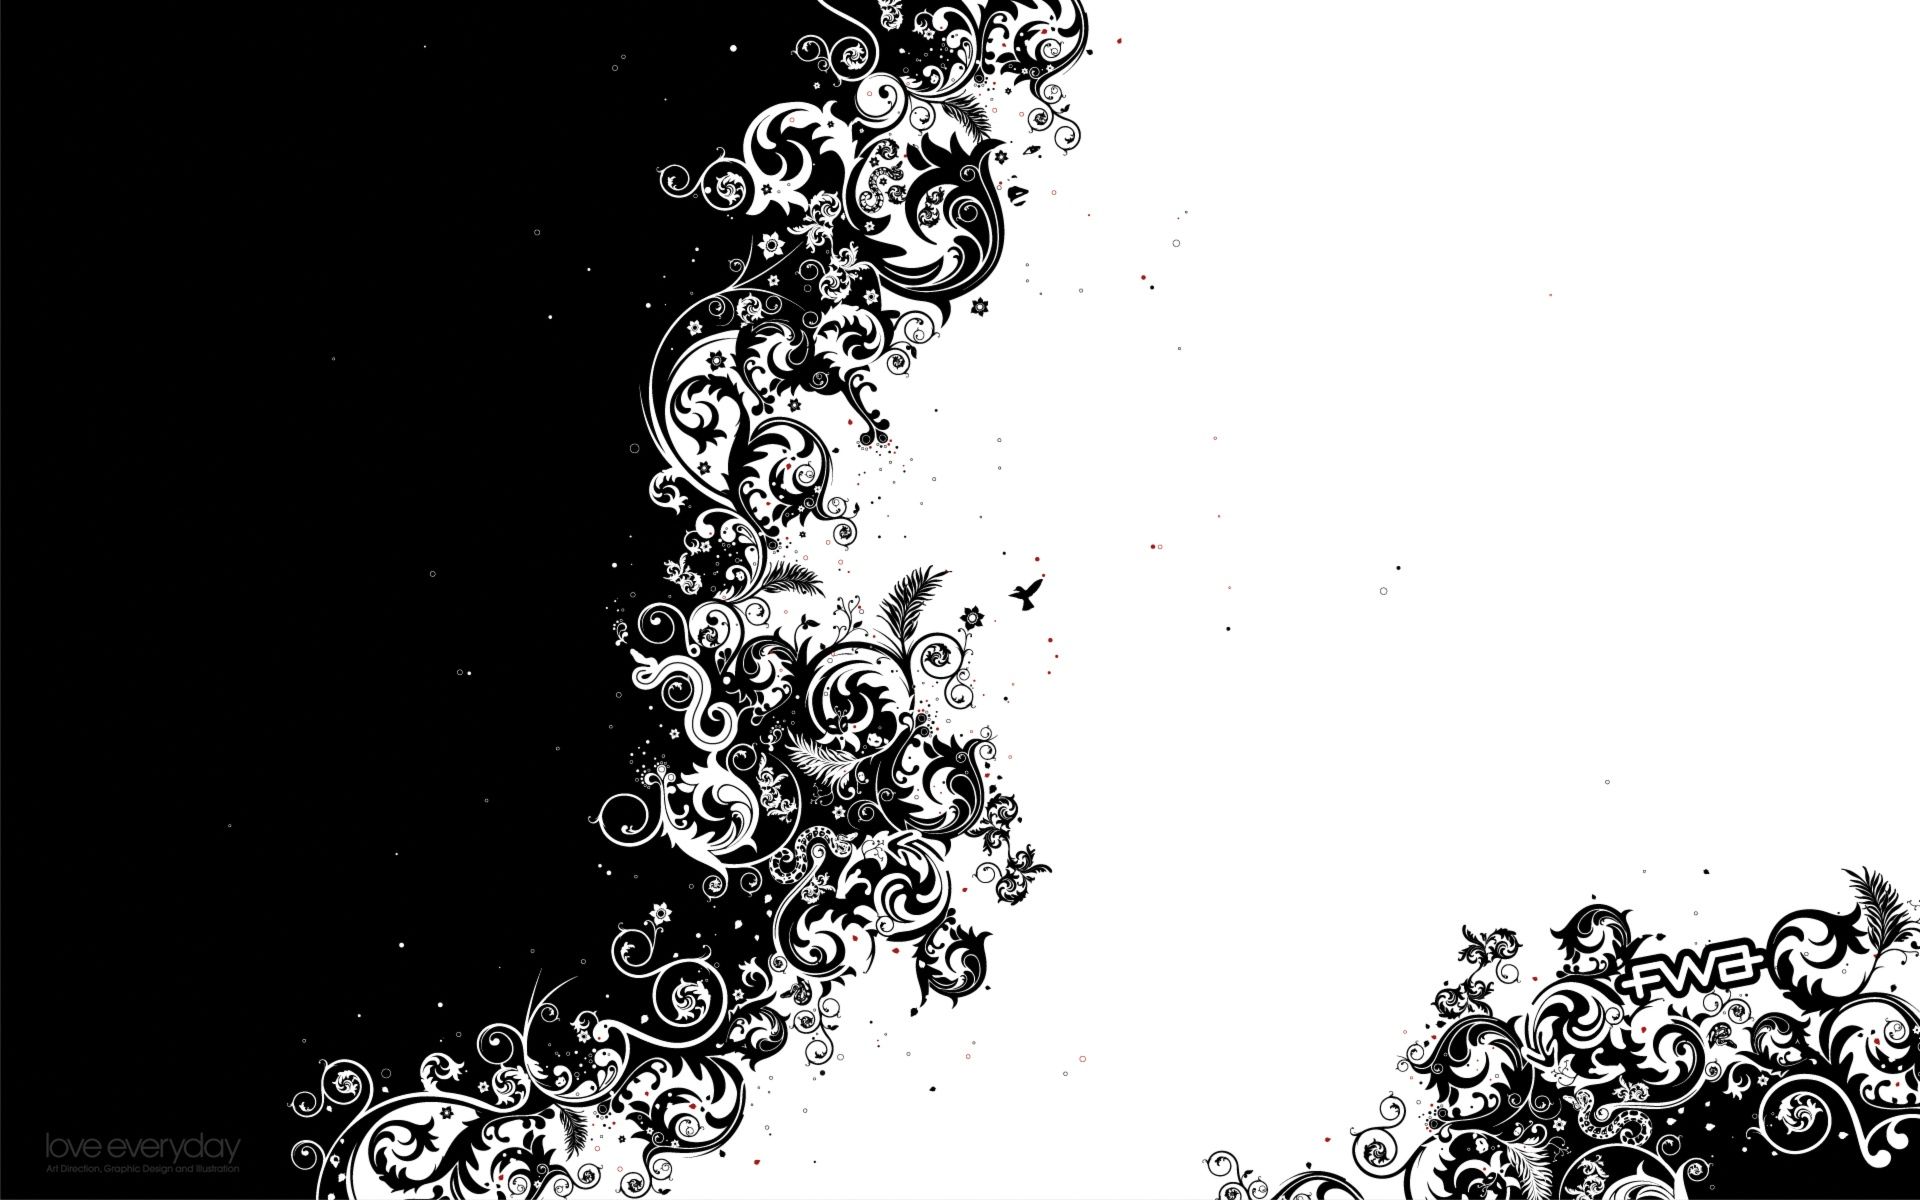 Free Vector Images Black And White, Download Free Vector Images Black ...